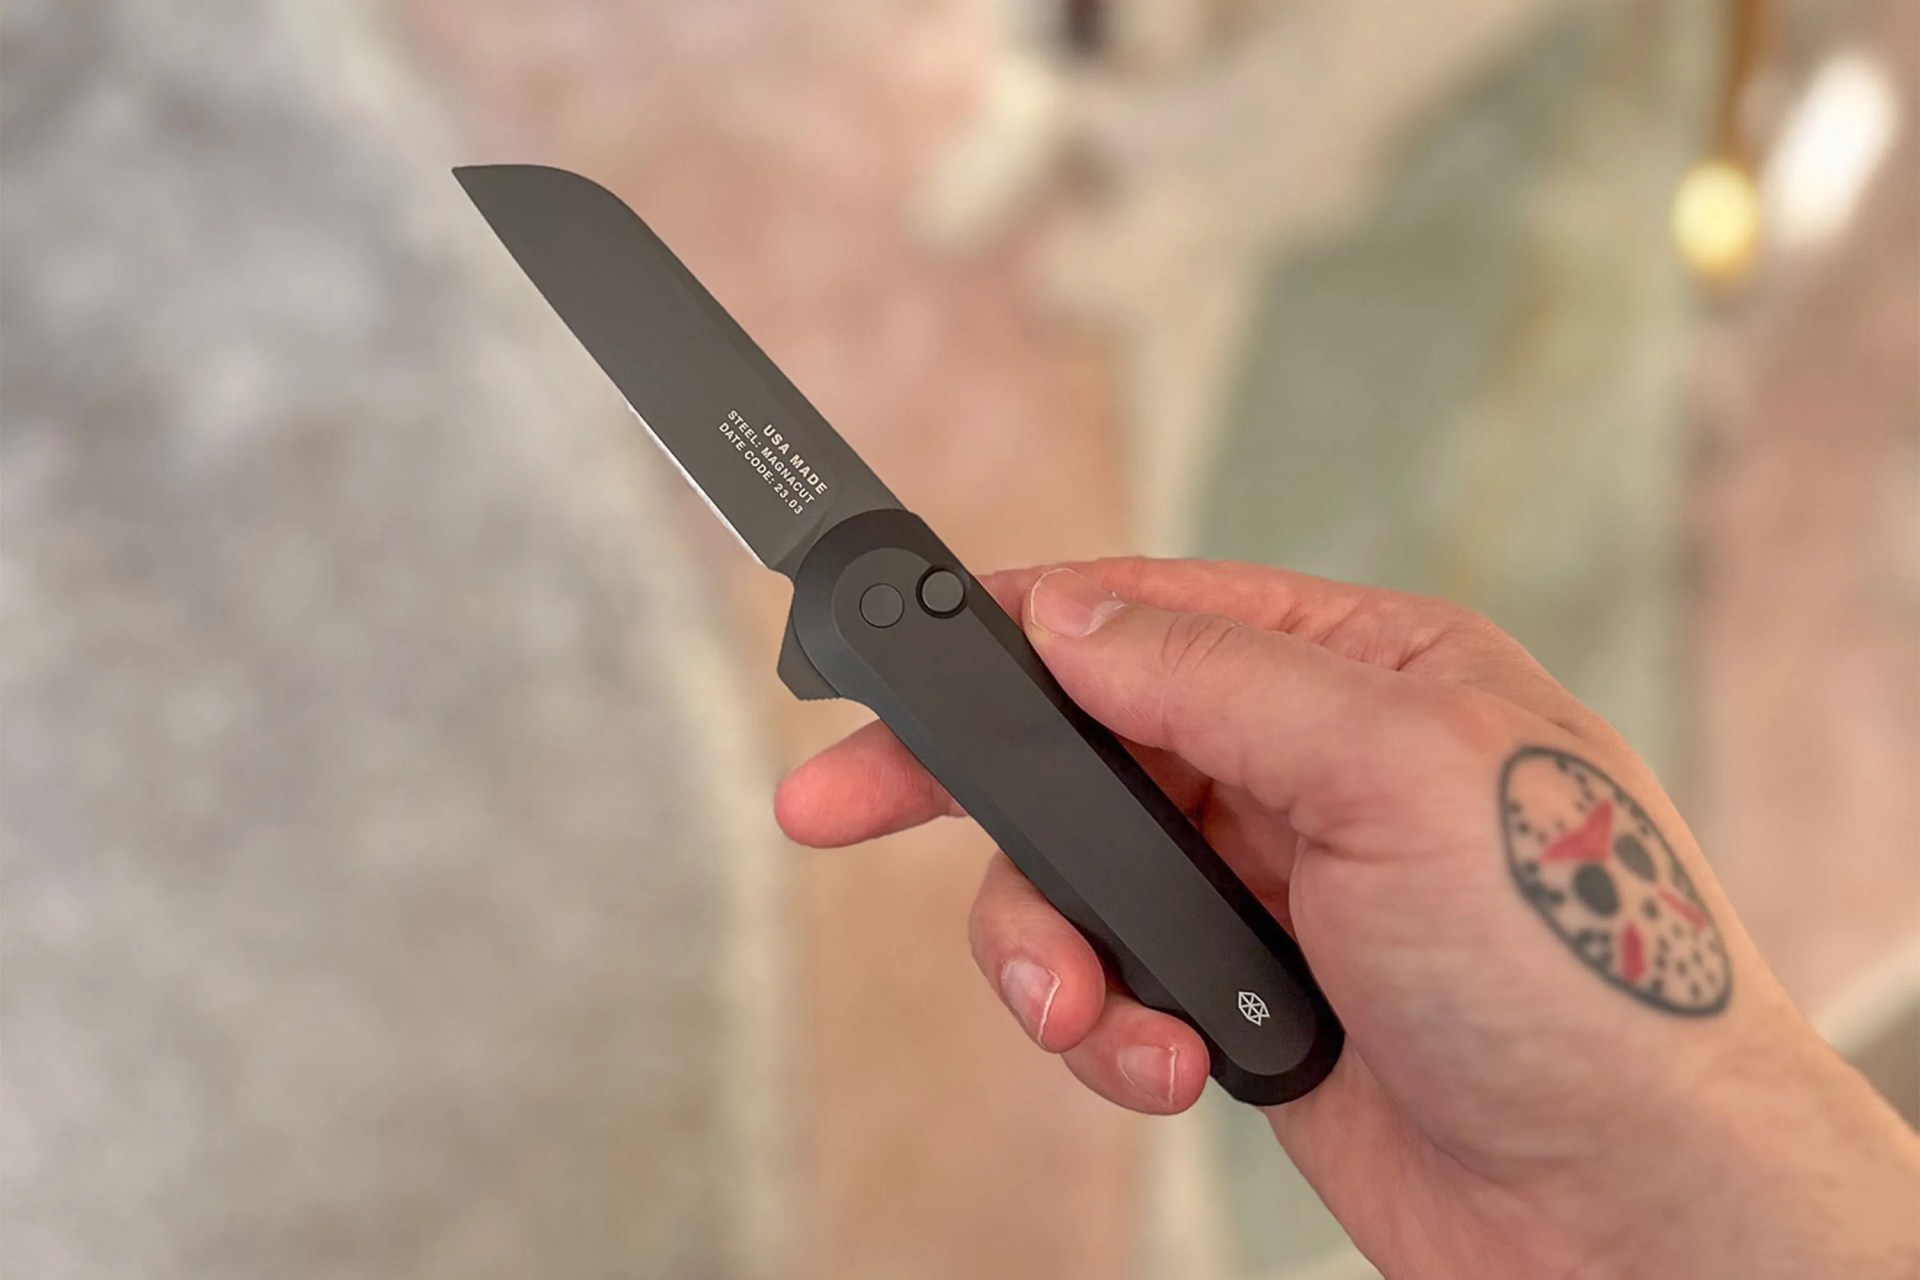 Does The James Brand’s First Flipper EDC Knife Live Up to the Hype? We Found Out